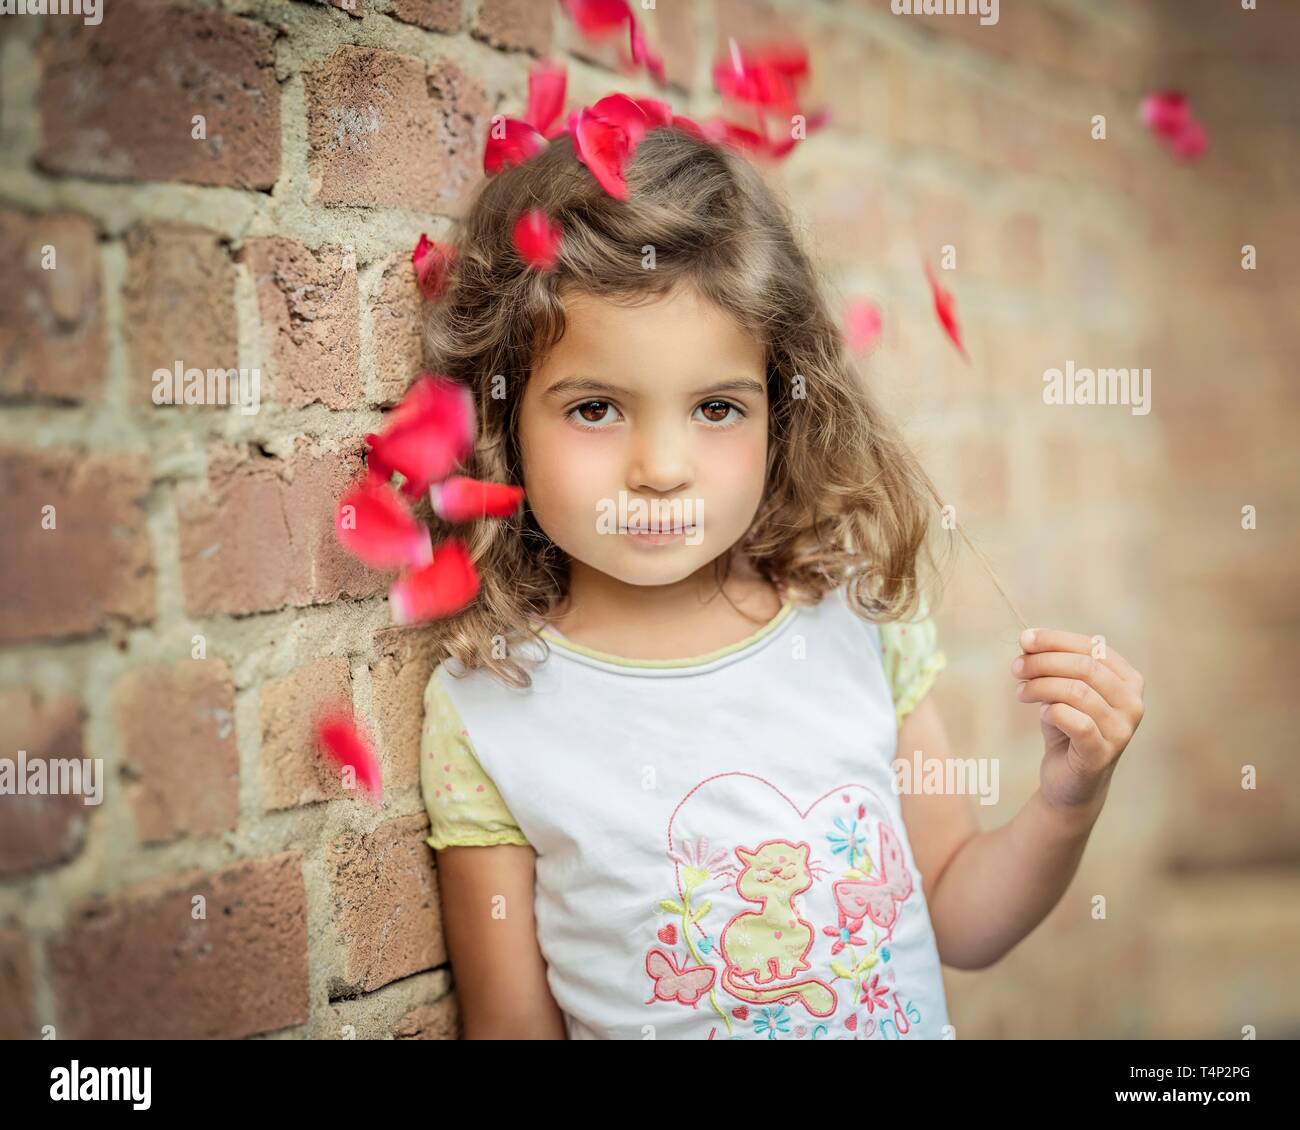 Girl, 3 years old, leans against a wall under flowers, Portrait, Germany Stock Photo